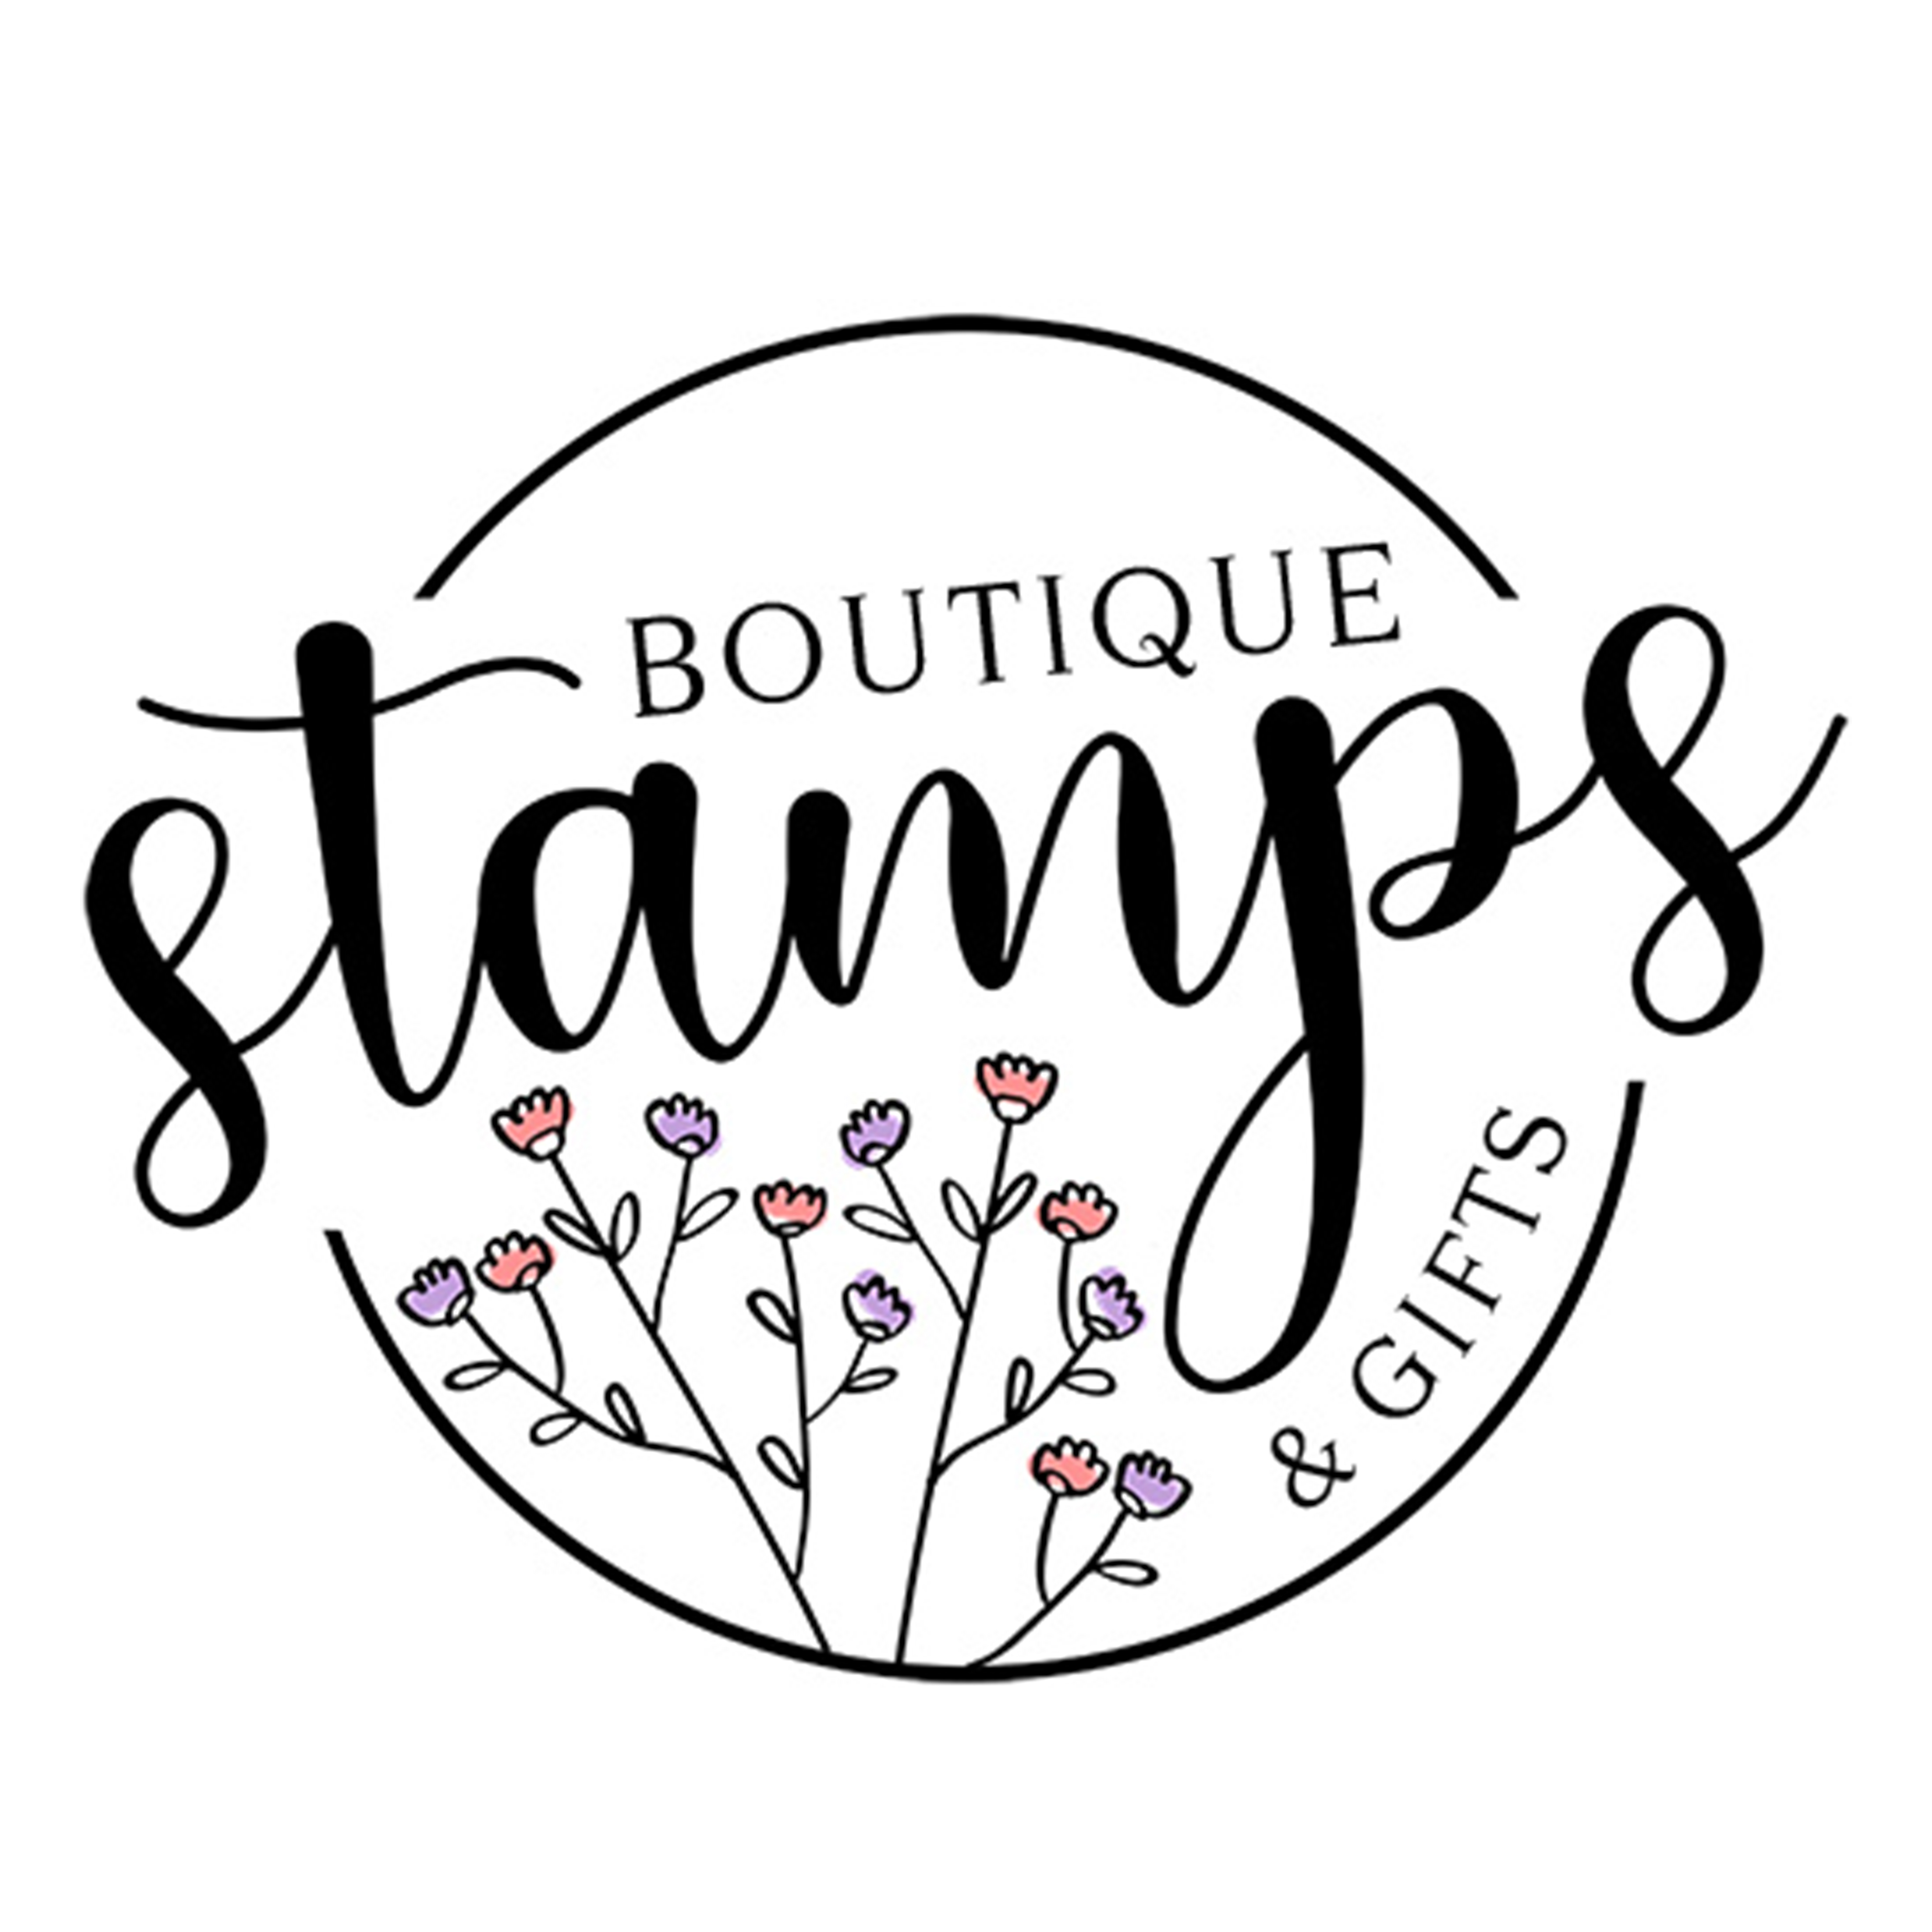 Boutique Stamps & Gifts logo